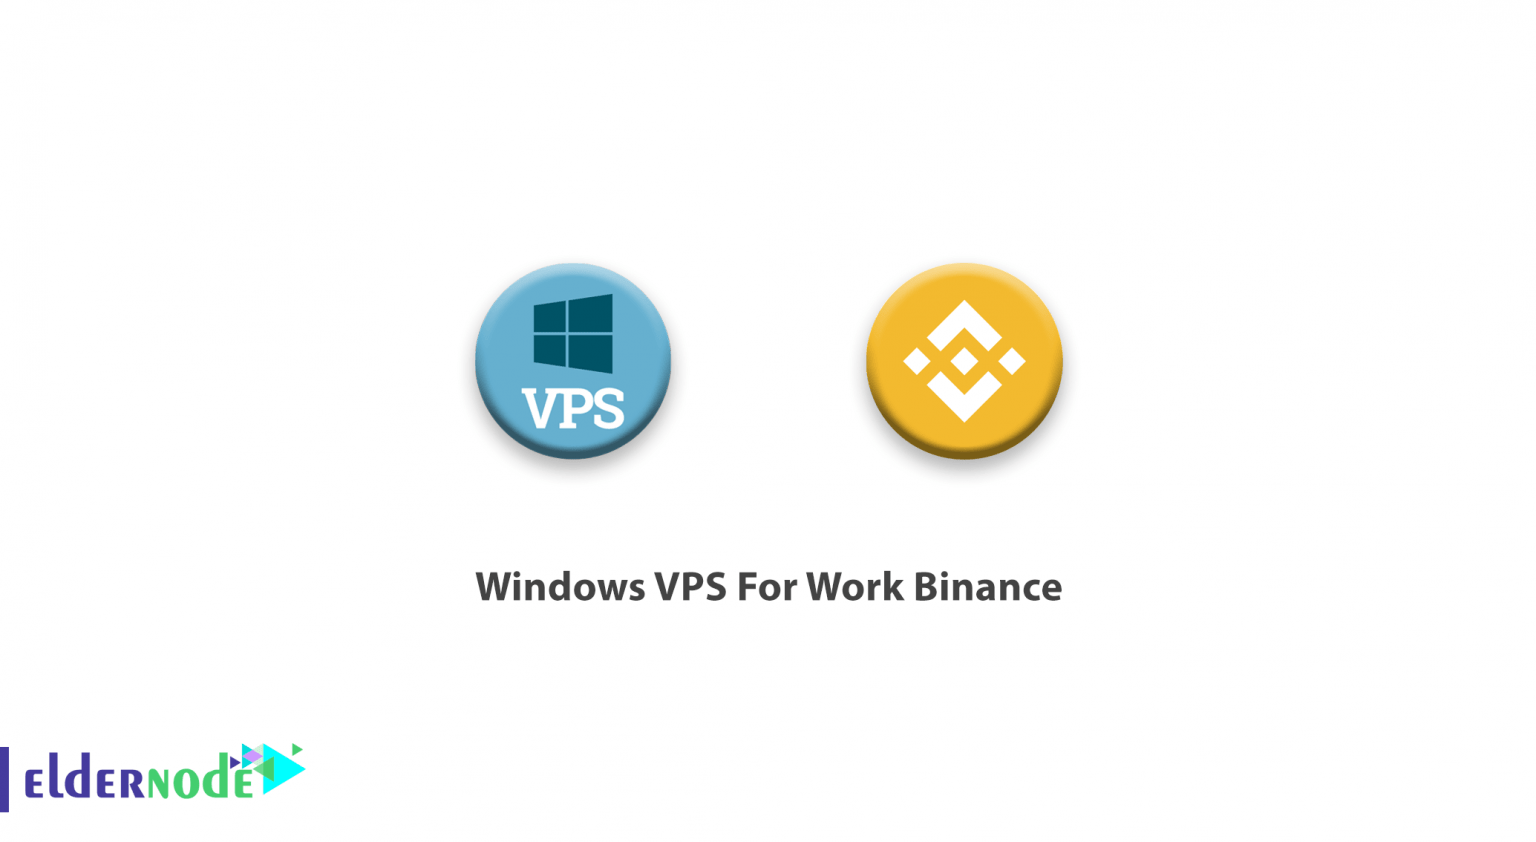 How to Buy Windows VPS For Work Binance and trade ...